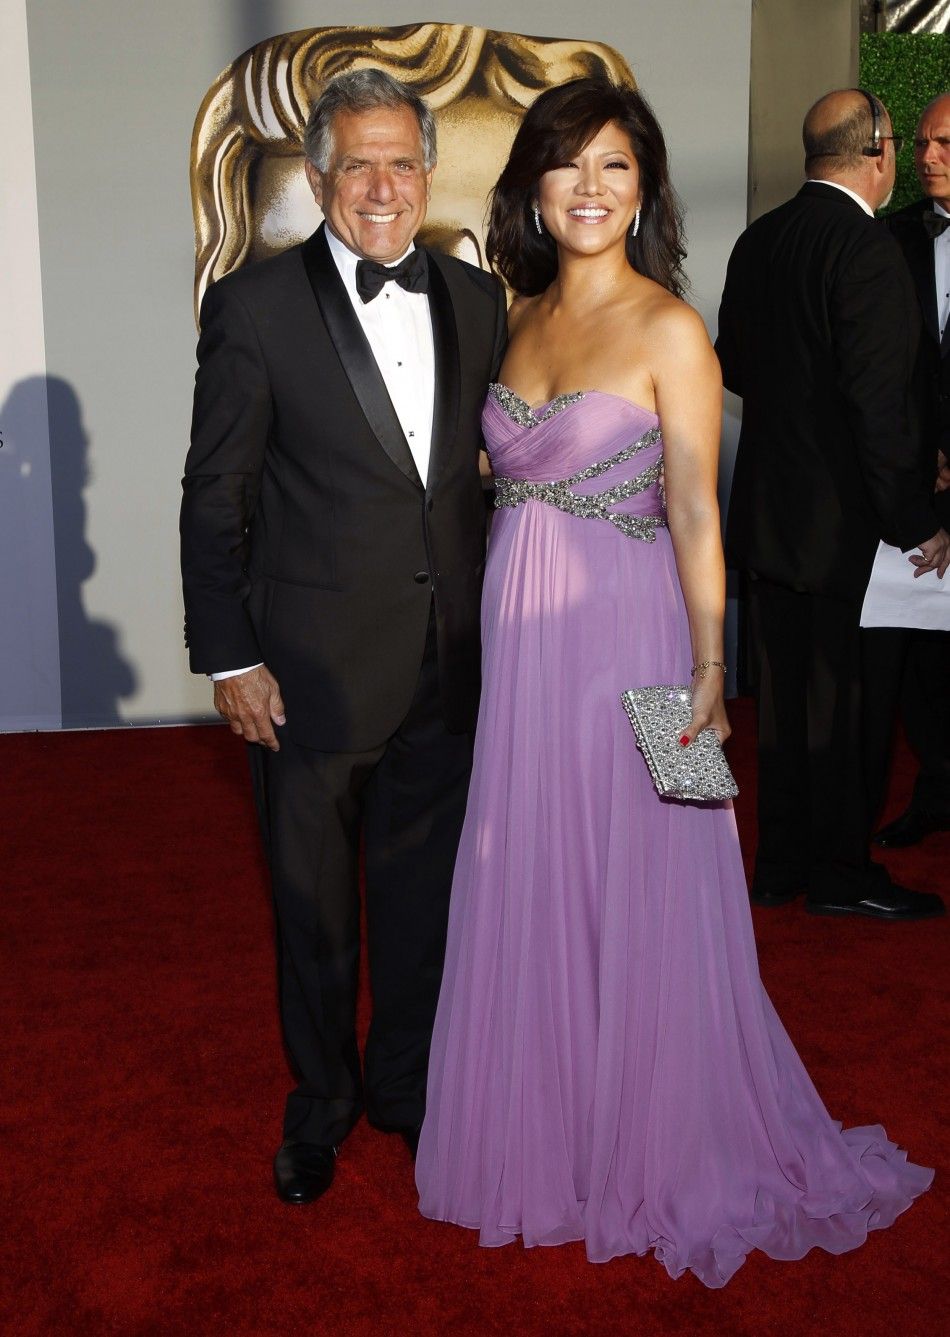 President and CEO of CBS Corporation Les Moonves and wife Julie Chen arrive at the BAFTA Brits to Watch event in Los Angeles